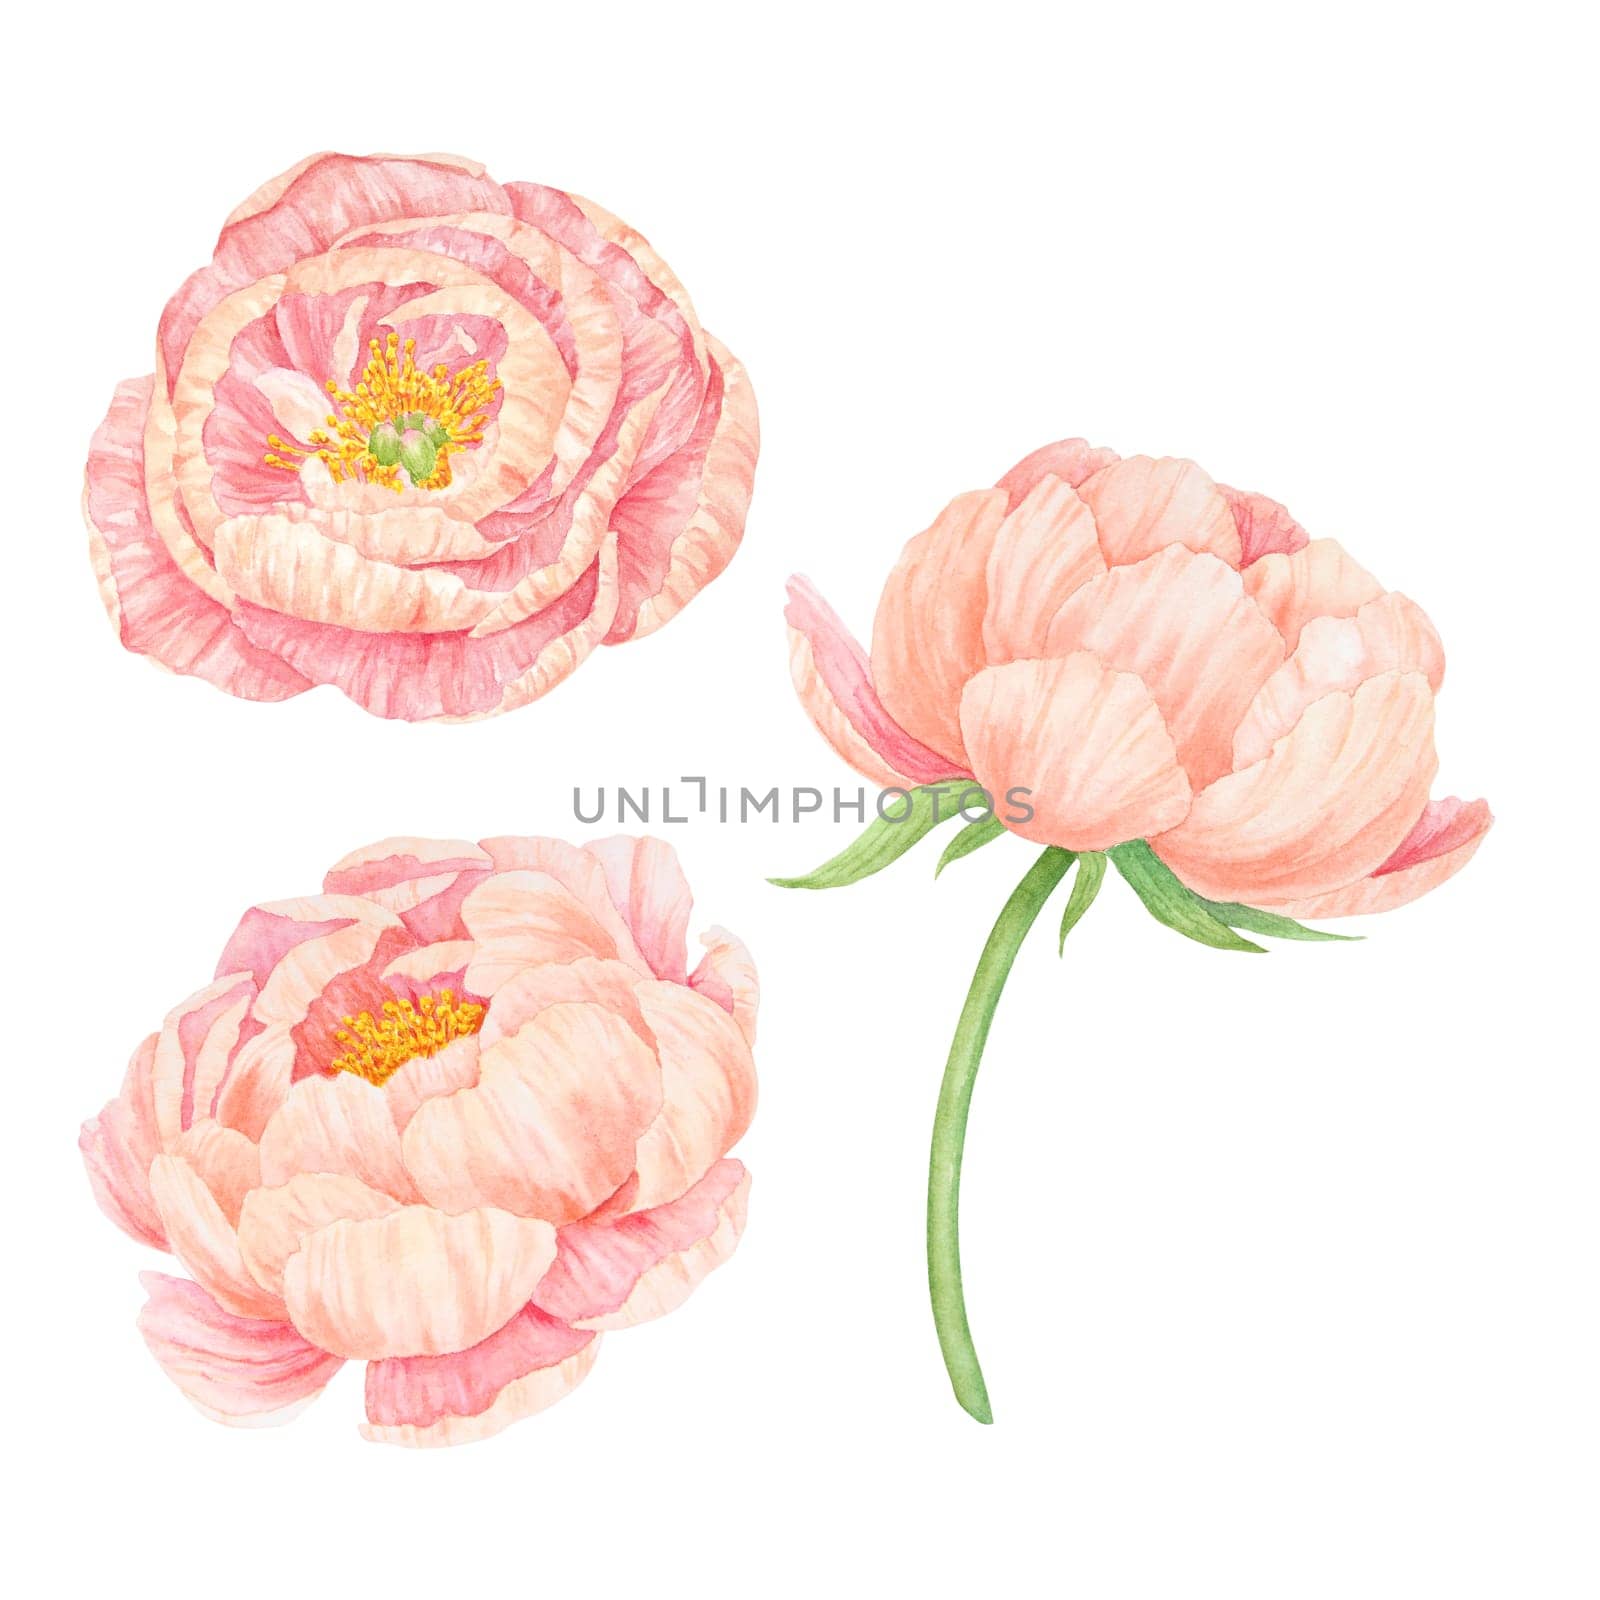 Peach peony watercolor hand drawn painting. Realistic flower clipart, floral arrangement. Chinese national symbol illustration. Perfect for card design, wedding invitation, prints, textile, packing by florainlove_art